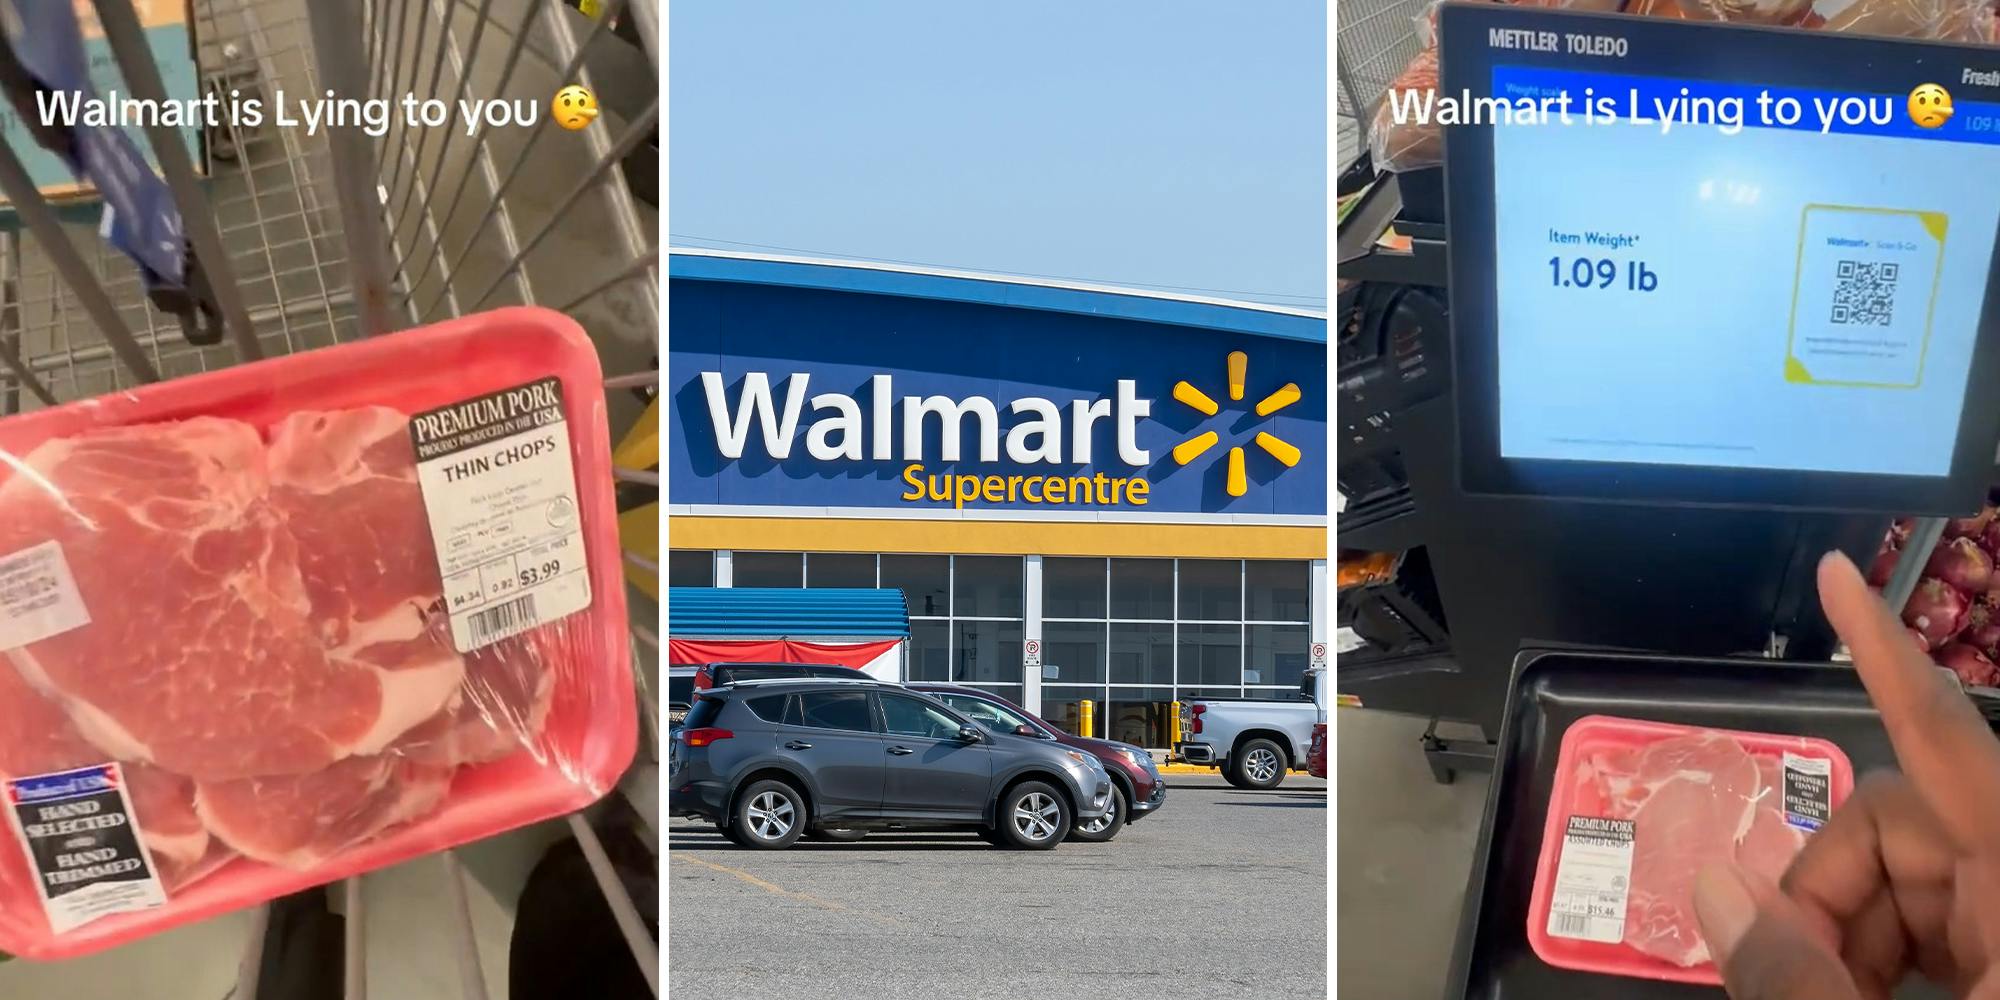 ‘I’m just scanning the cheaper one twice lol’: Shopper accuses Walmart of lying to customers after weighing 2 packs of pork chops